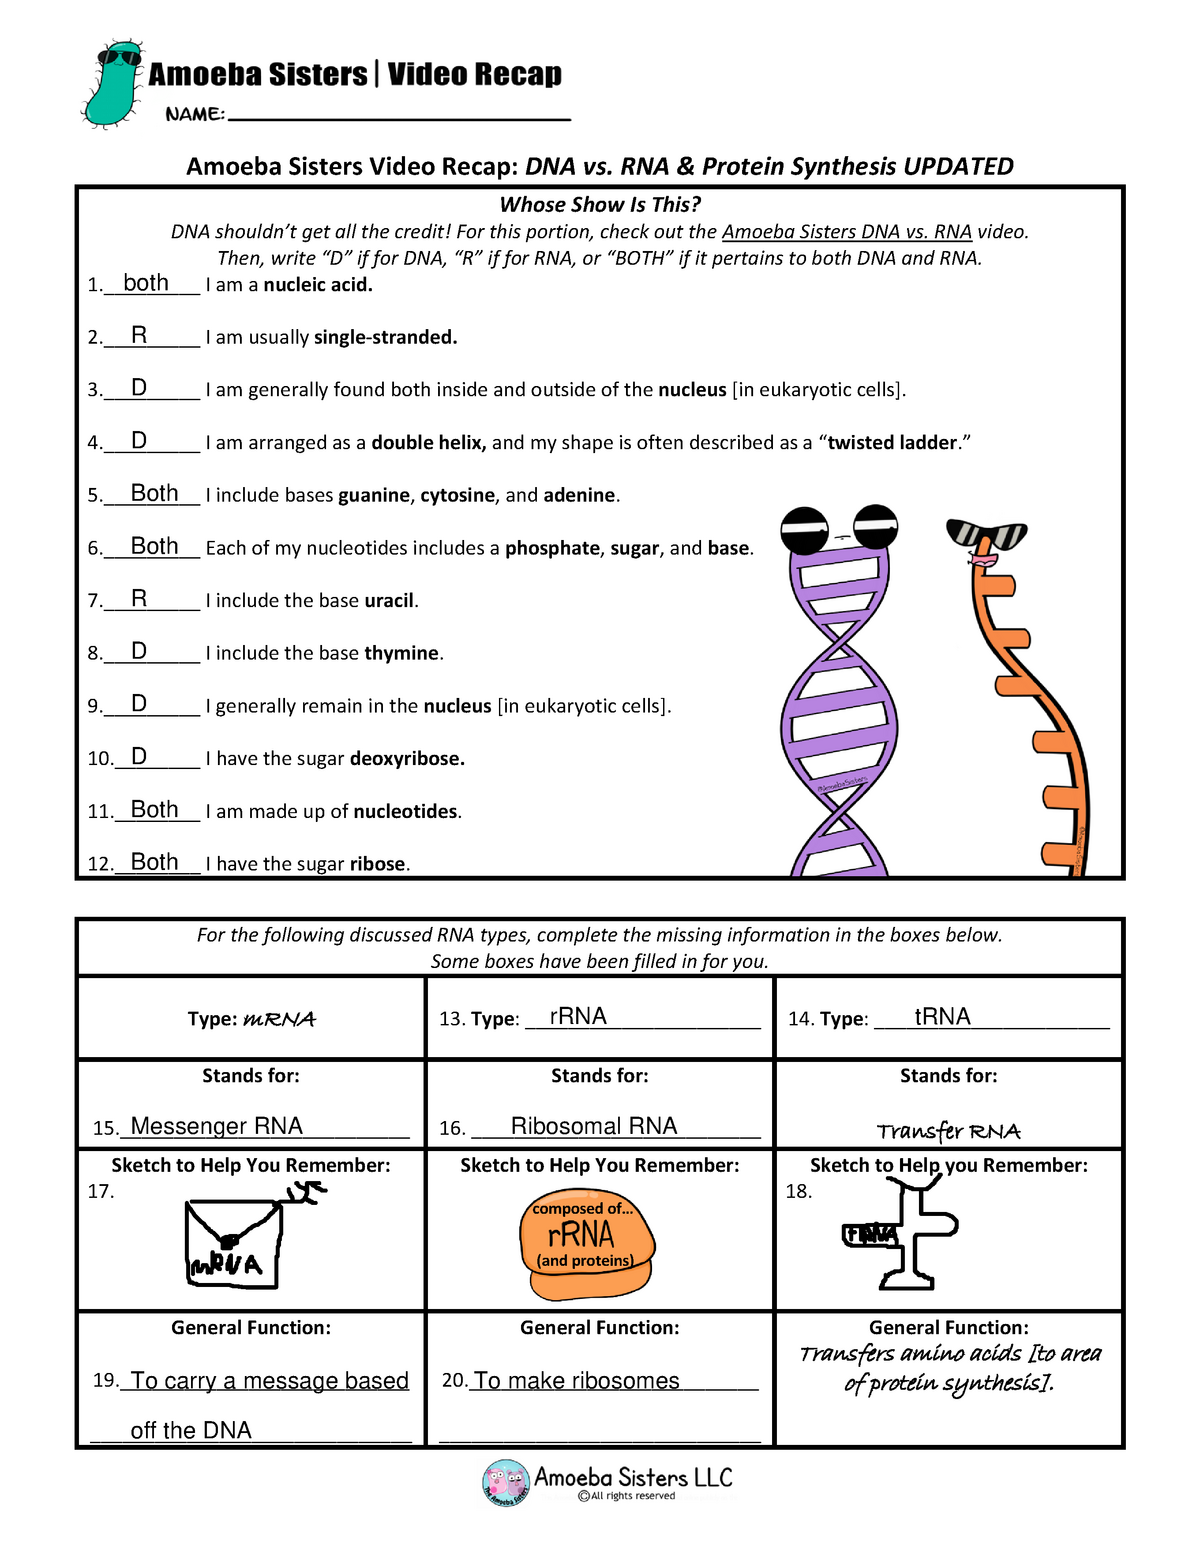 Dna vs rna and protein synthesis updated recap by amoeba sisters Inside Nucleic Acid Worksheet Answers